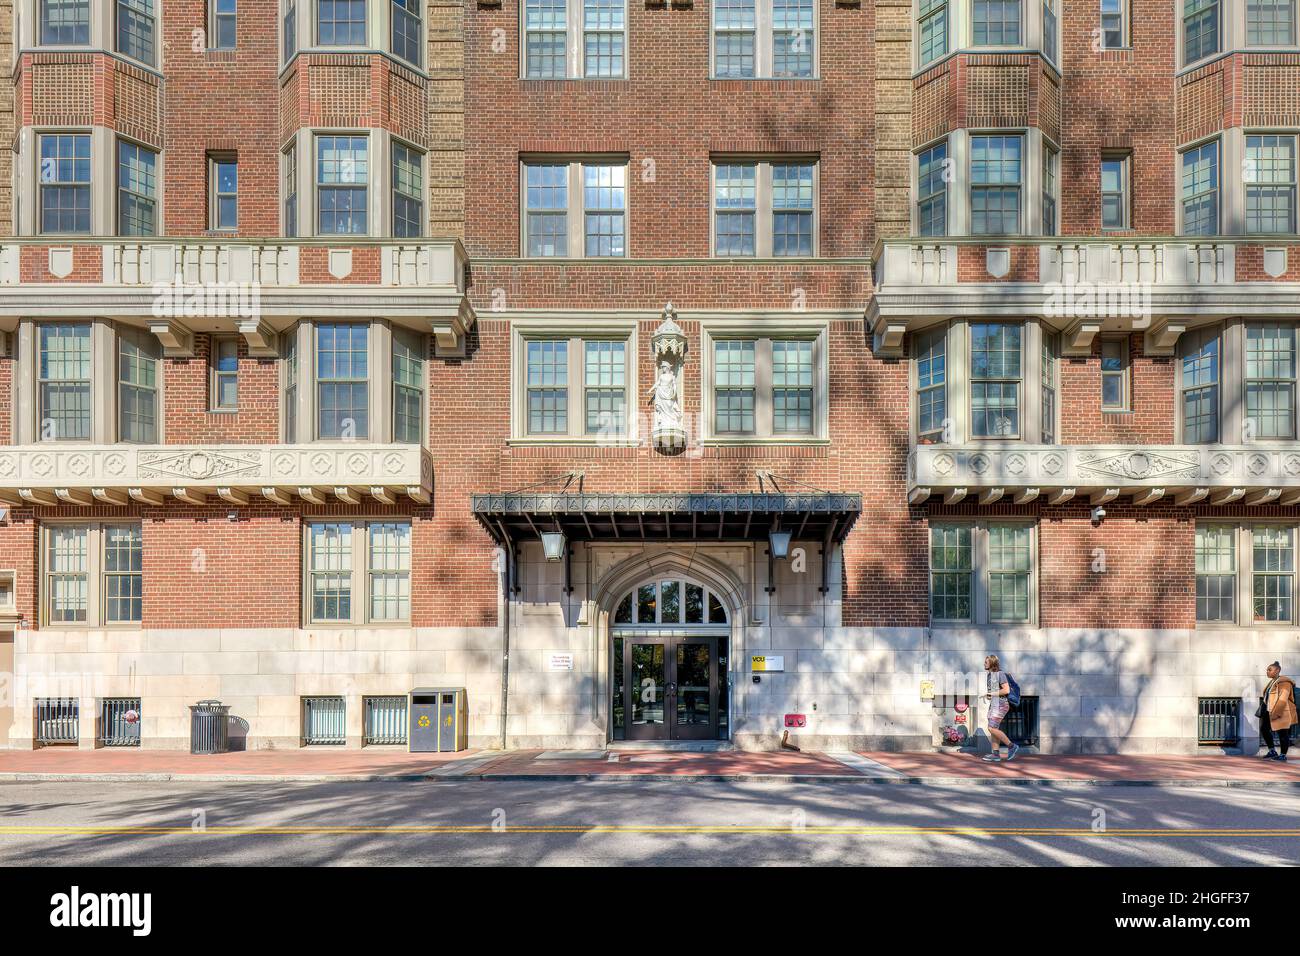 Johnson Hall was built in 1915 as the Monroe Terrace Apartments, designed by Alfred C. Bossom in neo-Gothic style. Stock Photo